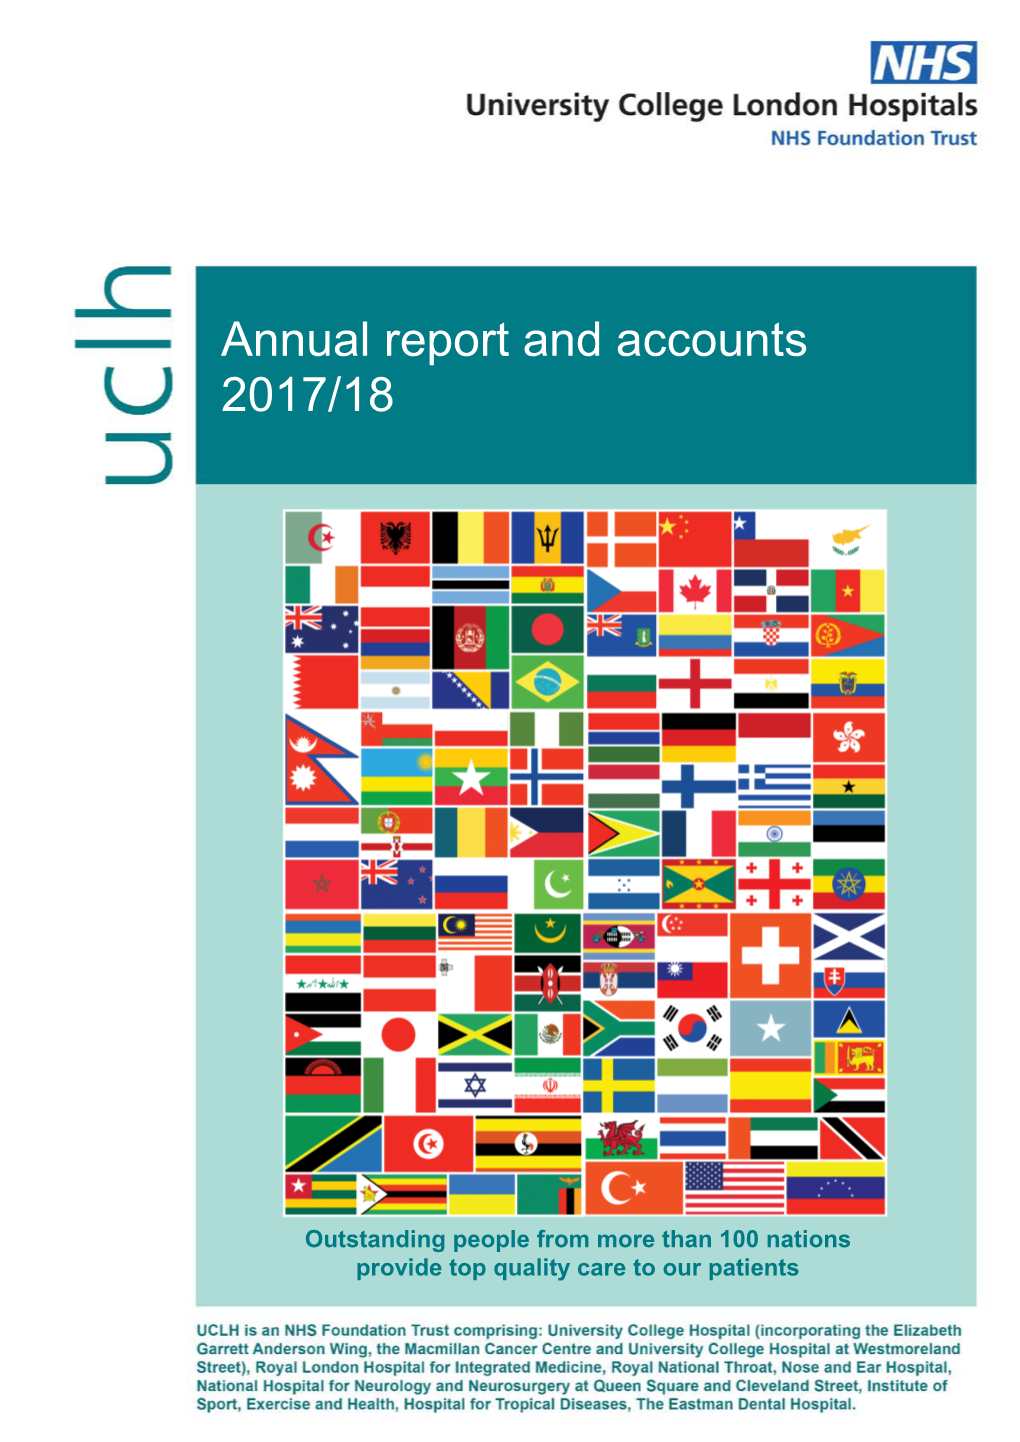 Annual Report and Accounts 2017/18